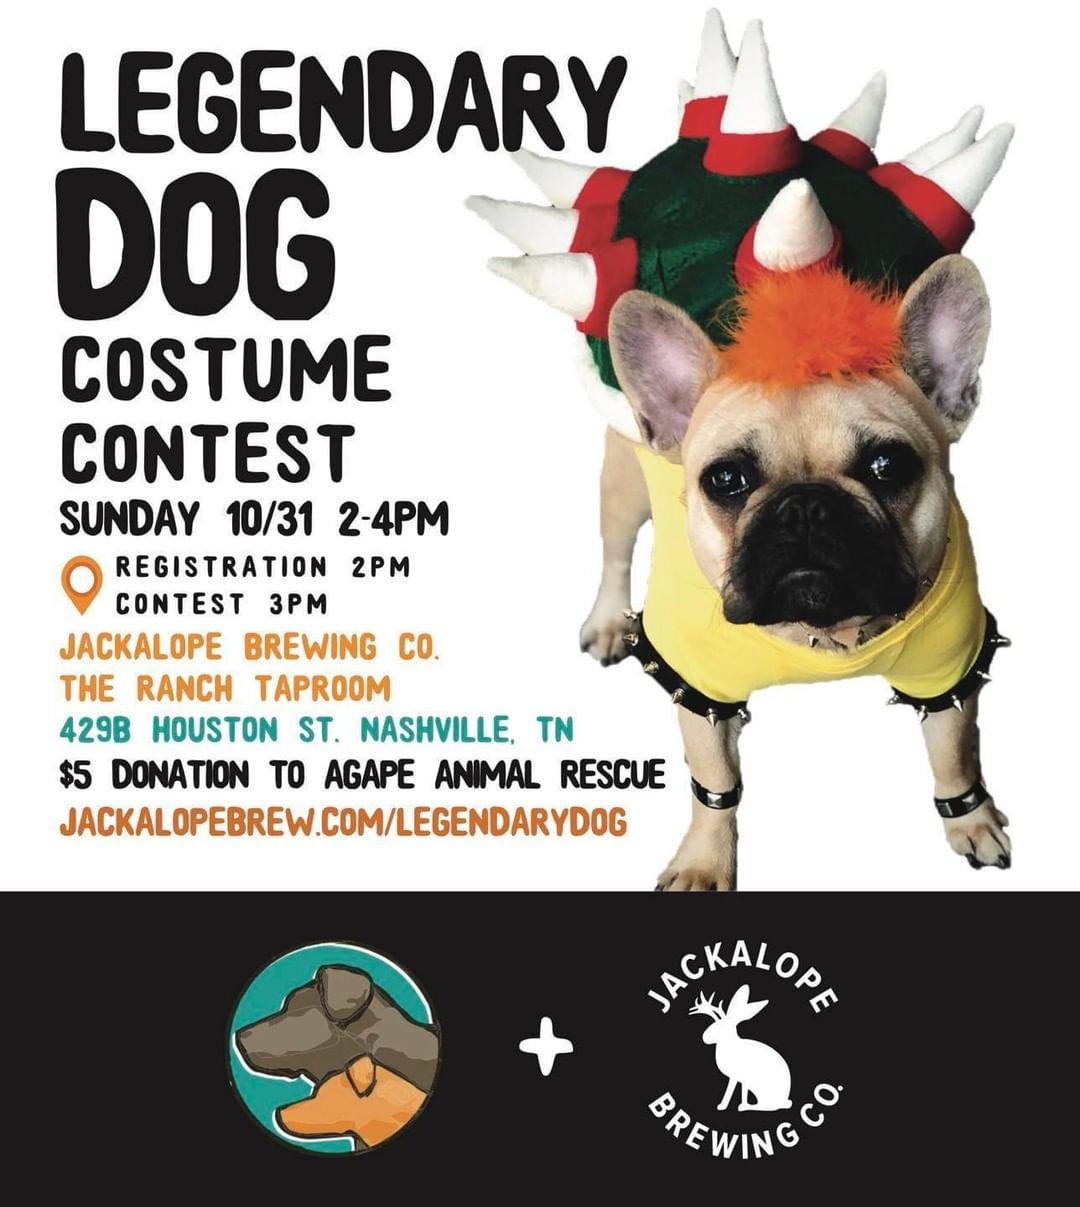 We are very excited for the Legendary Dog Costume Contest at @jackalopetaproom this Sunday! 

There will be awards of Jackalope + Agape swag in three categories:
1. Cutest Costume
2. Scariest Costume
3. Most Original Costume

The more creative the costume, the better! Prior to the contest, join us for family friendly fun, spooky tunes, and tasty brews.

There is an entry fee of a $5 donation to Agape. Sign up in advance at jackalopebrew.com/legendarydog 🎃🐶 We hope to see you there!